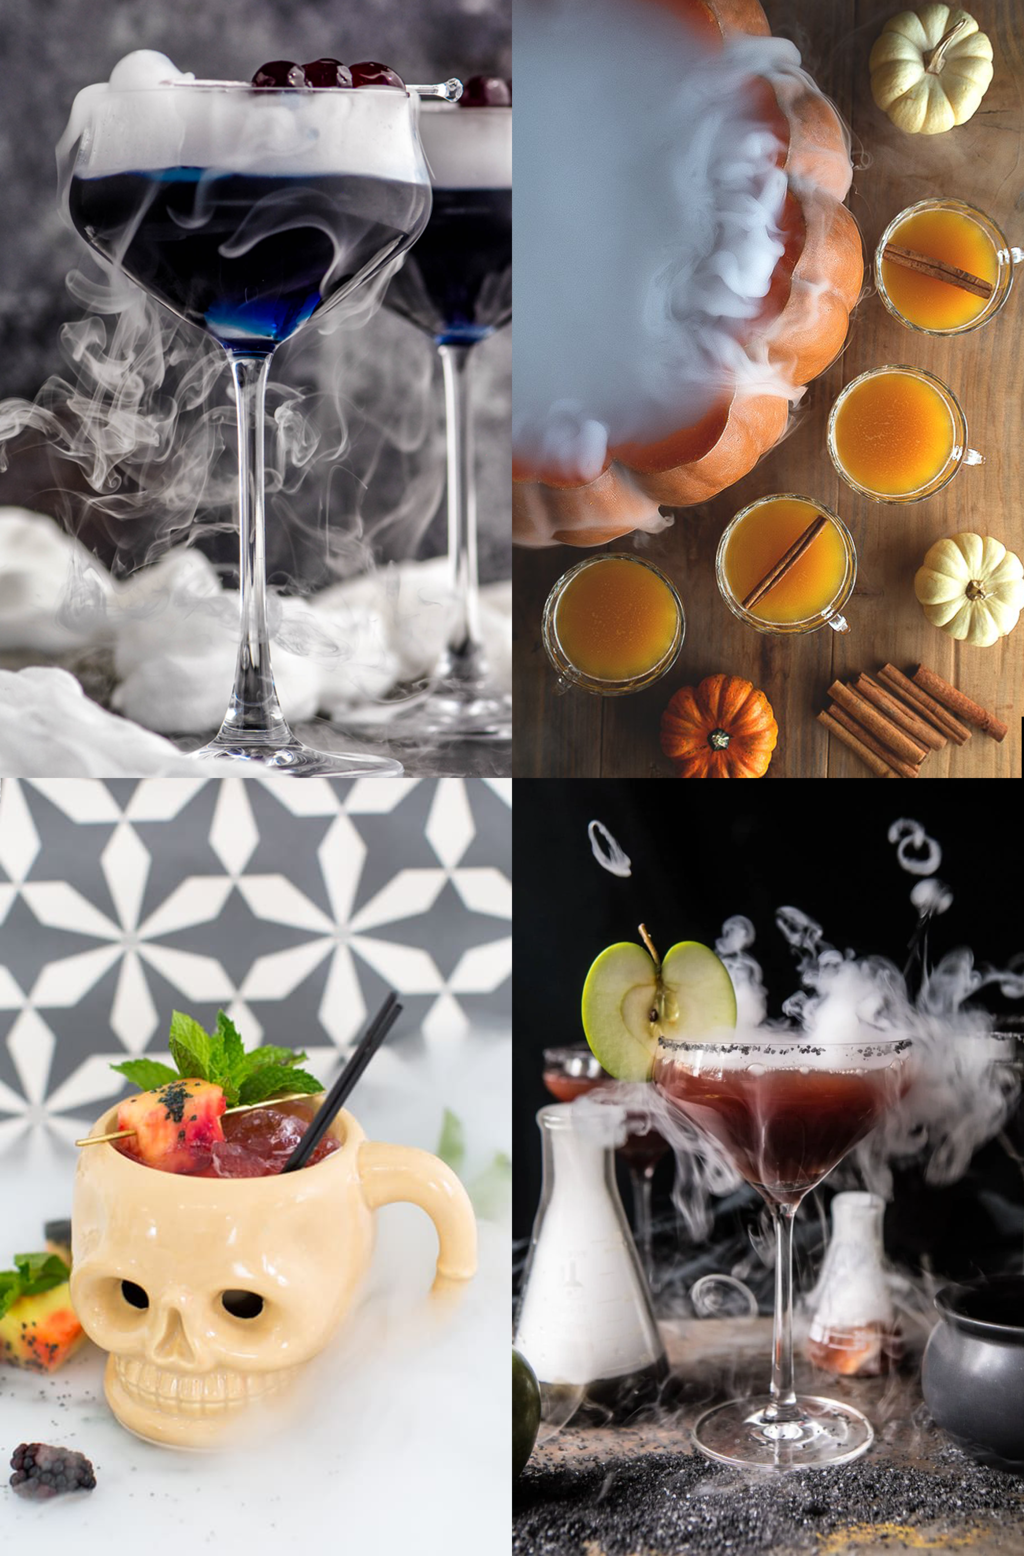 Using Dry Ice for Cocktails